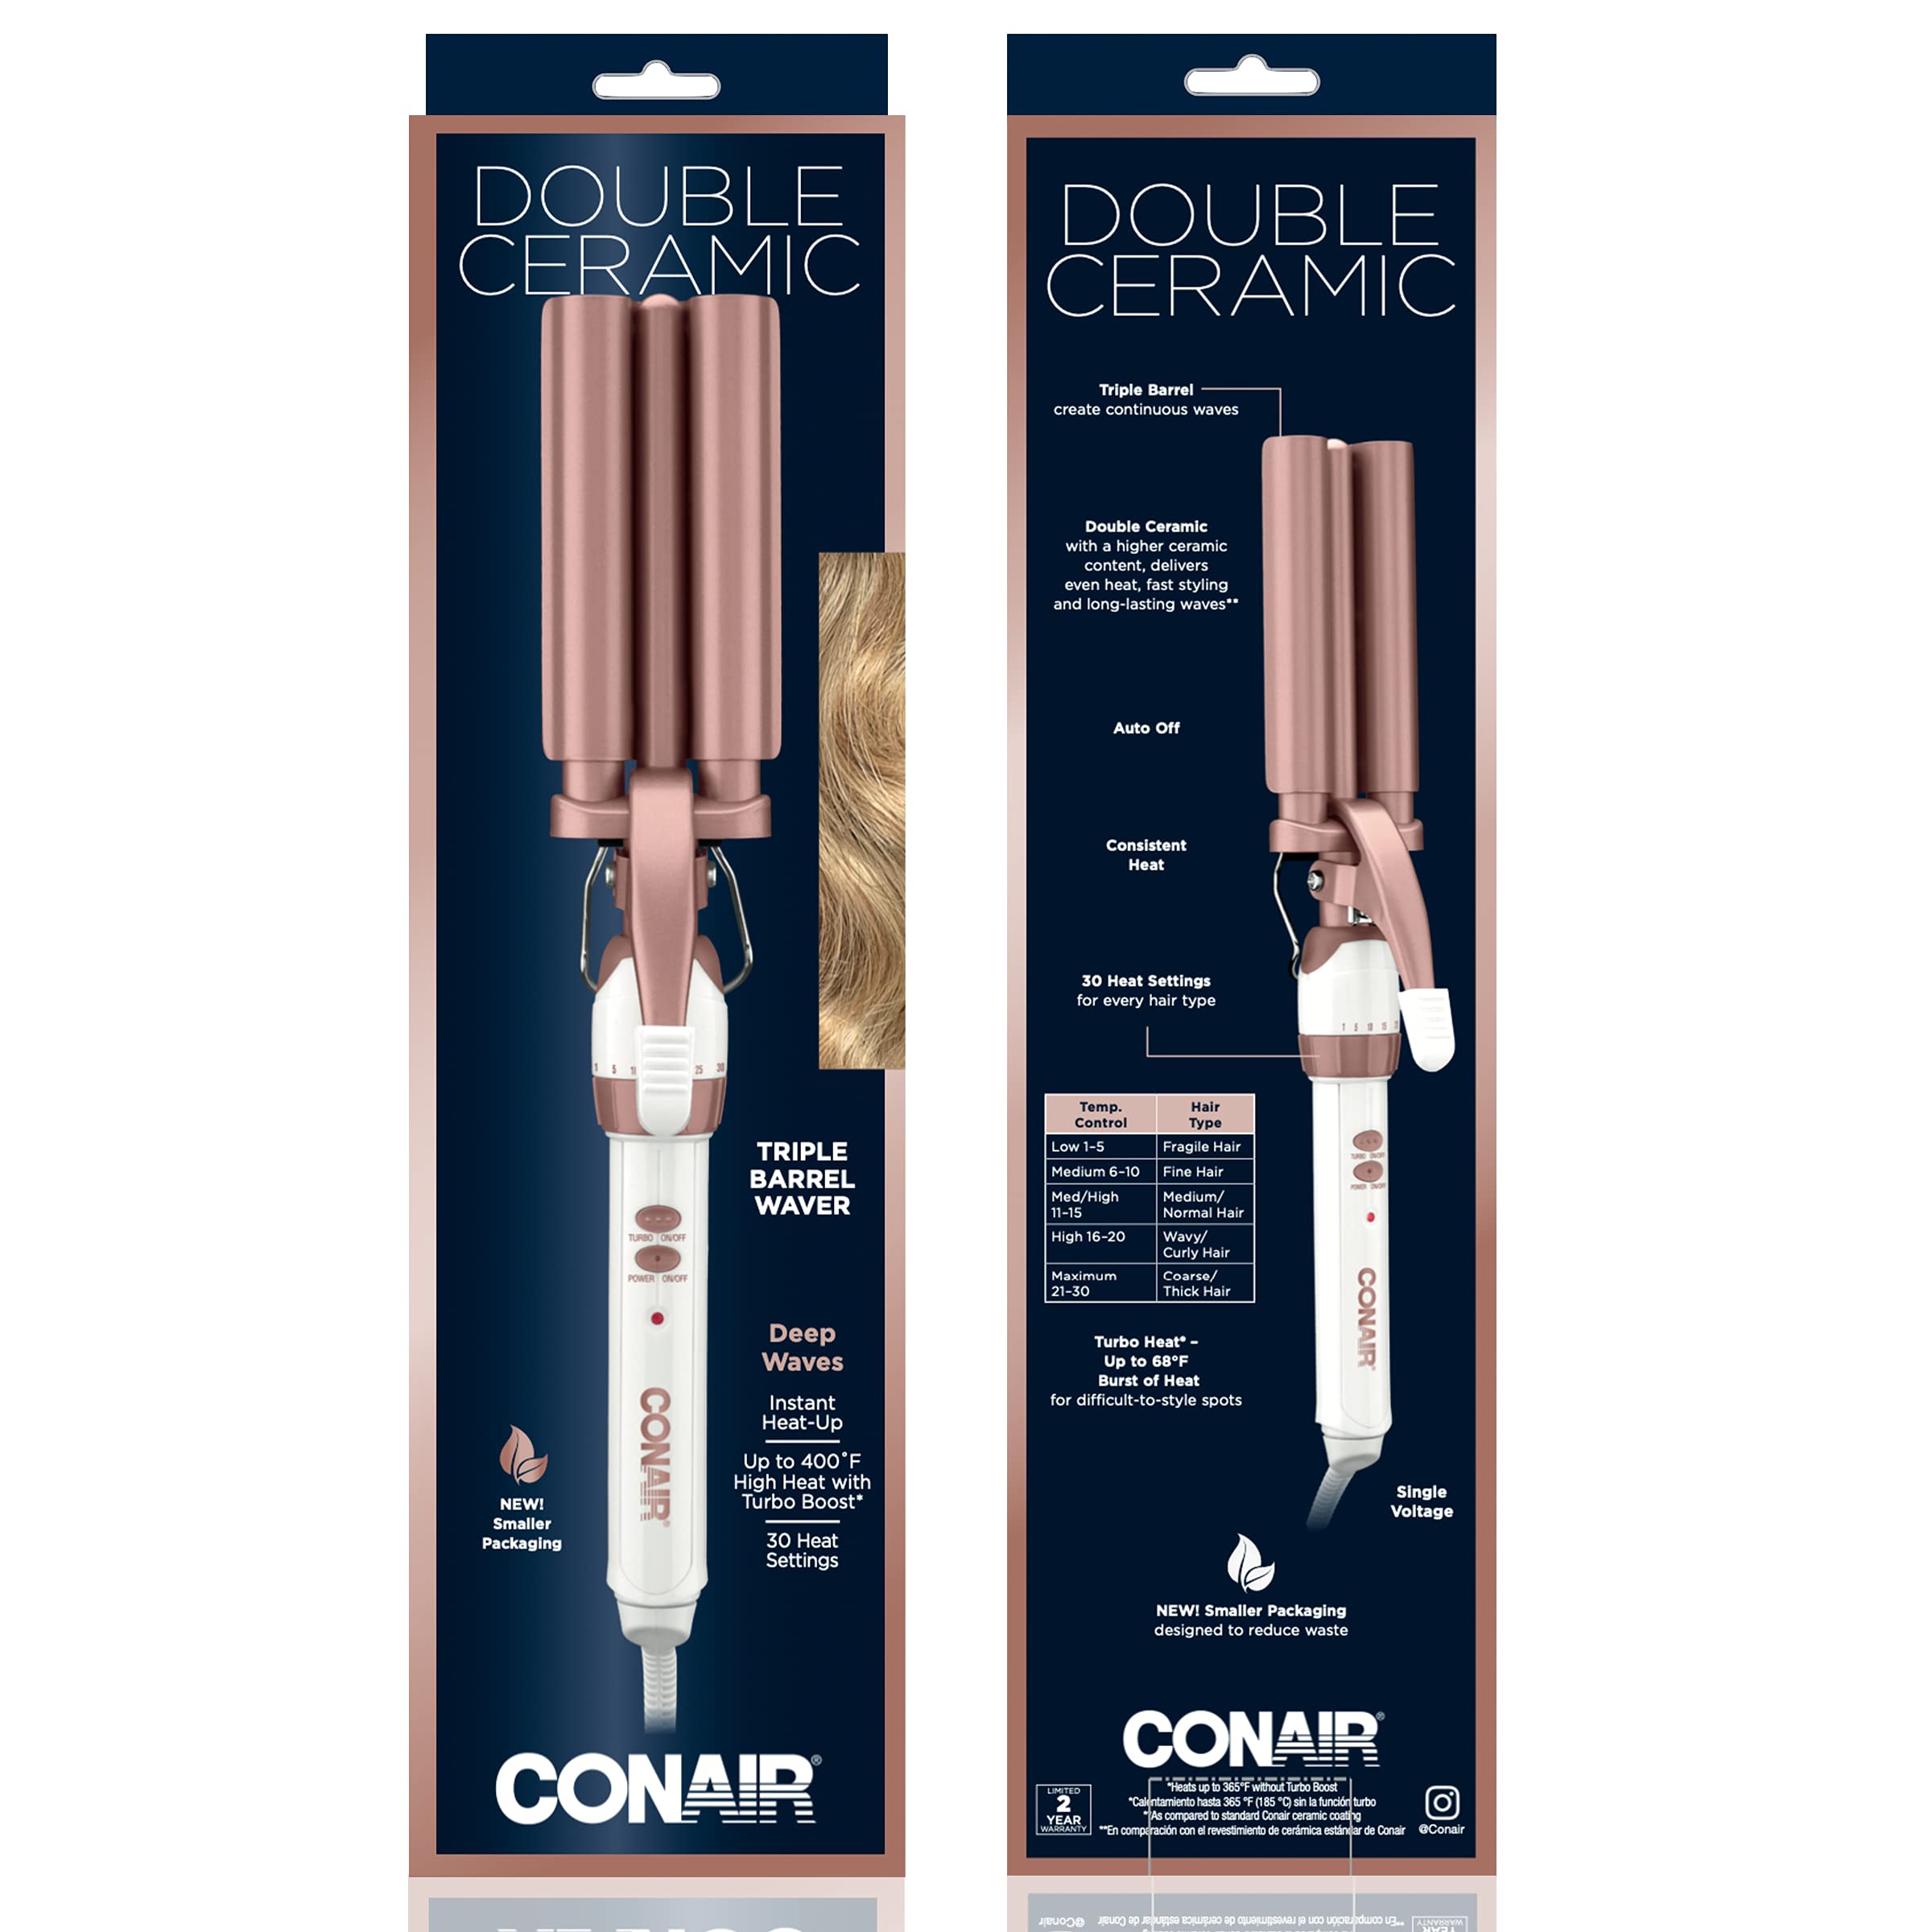 Conair Double Ceramic 3 Barrel Curling Iron, Hair Waver, Create Beachy Waves, Long-Lasting Natural Tight Waves for all Hair Lengths